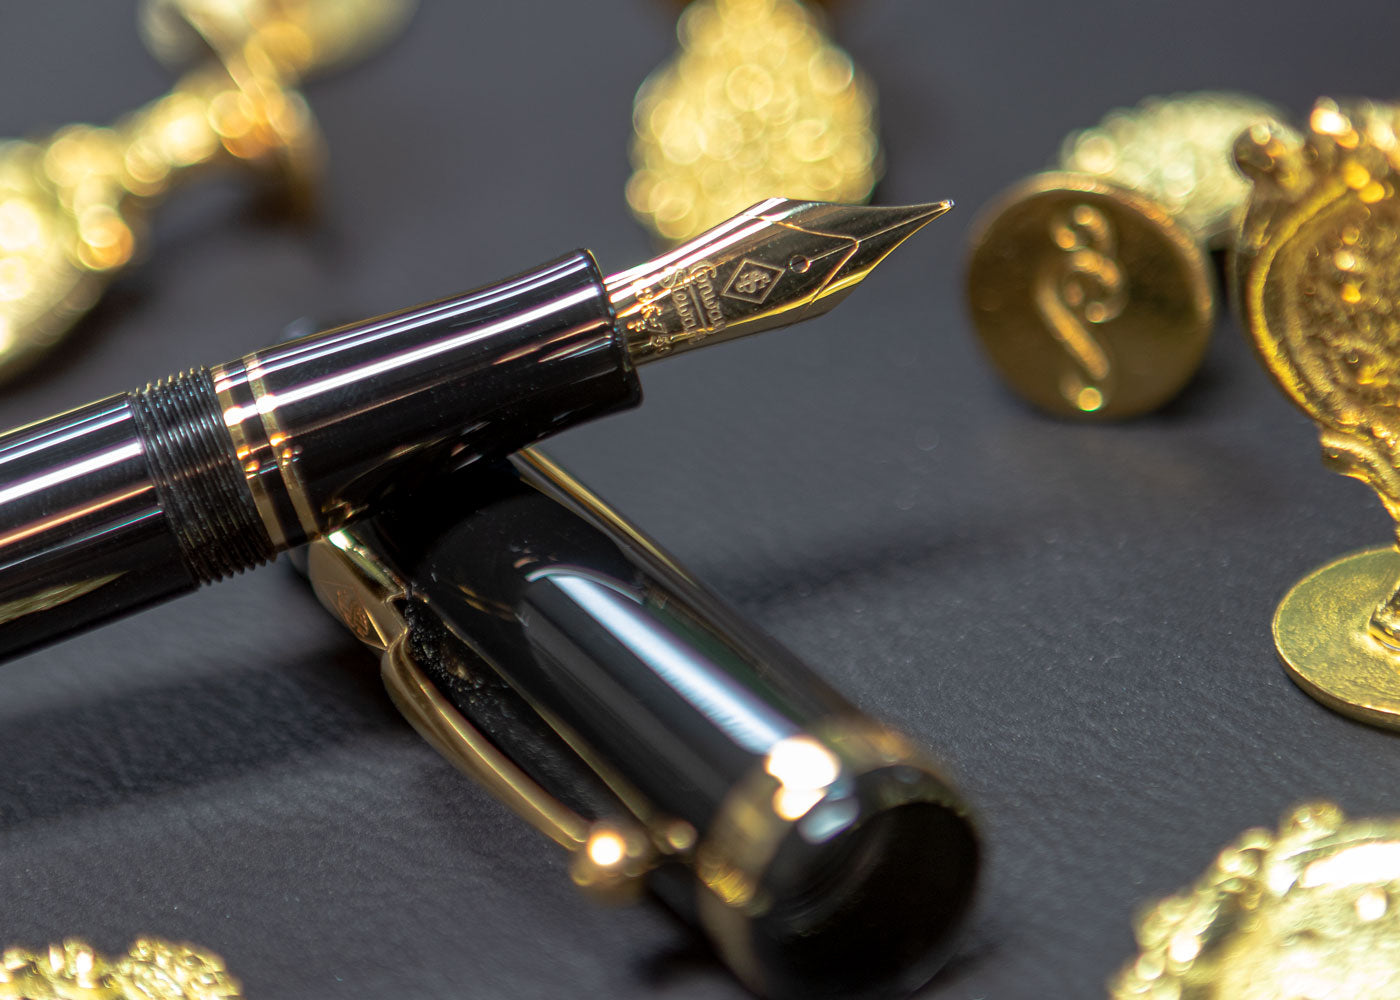 Conway Stewart British made Luxury pens.  These Pens are for wordsmithing, hand lettering, writing, calligraphy, drawing, and art.